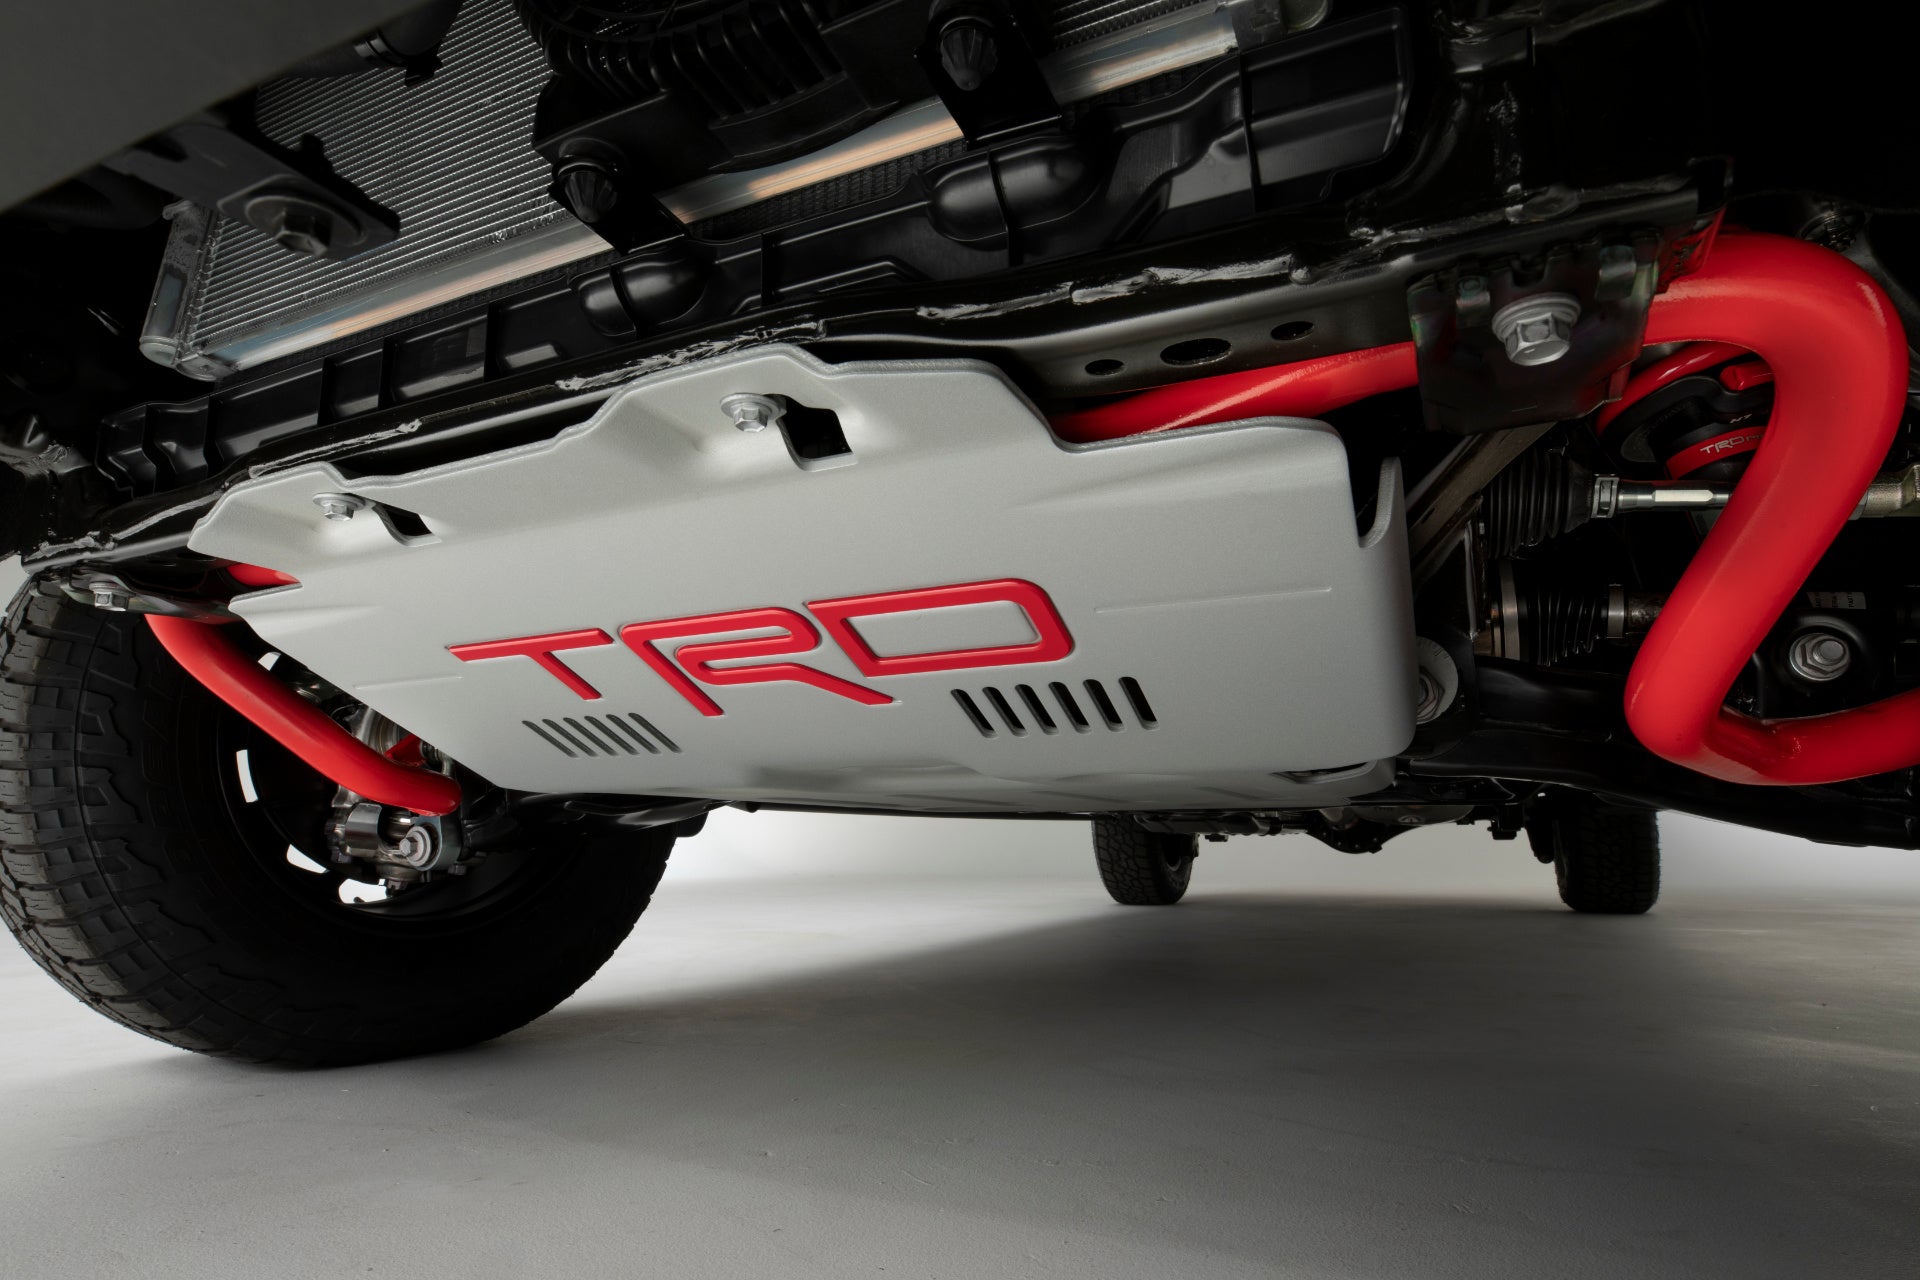 Under the front of the TRD Pro, <i>Toyota</i>